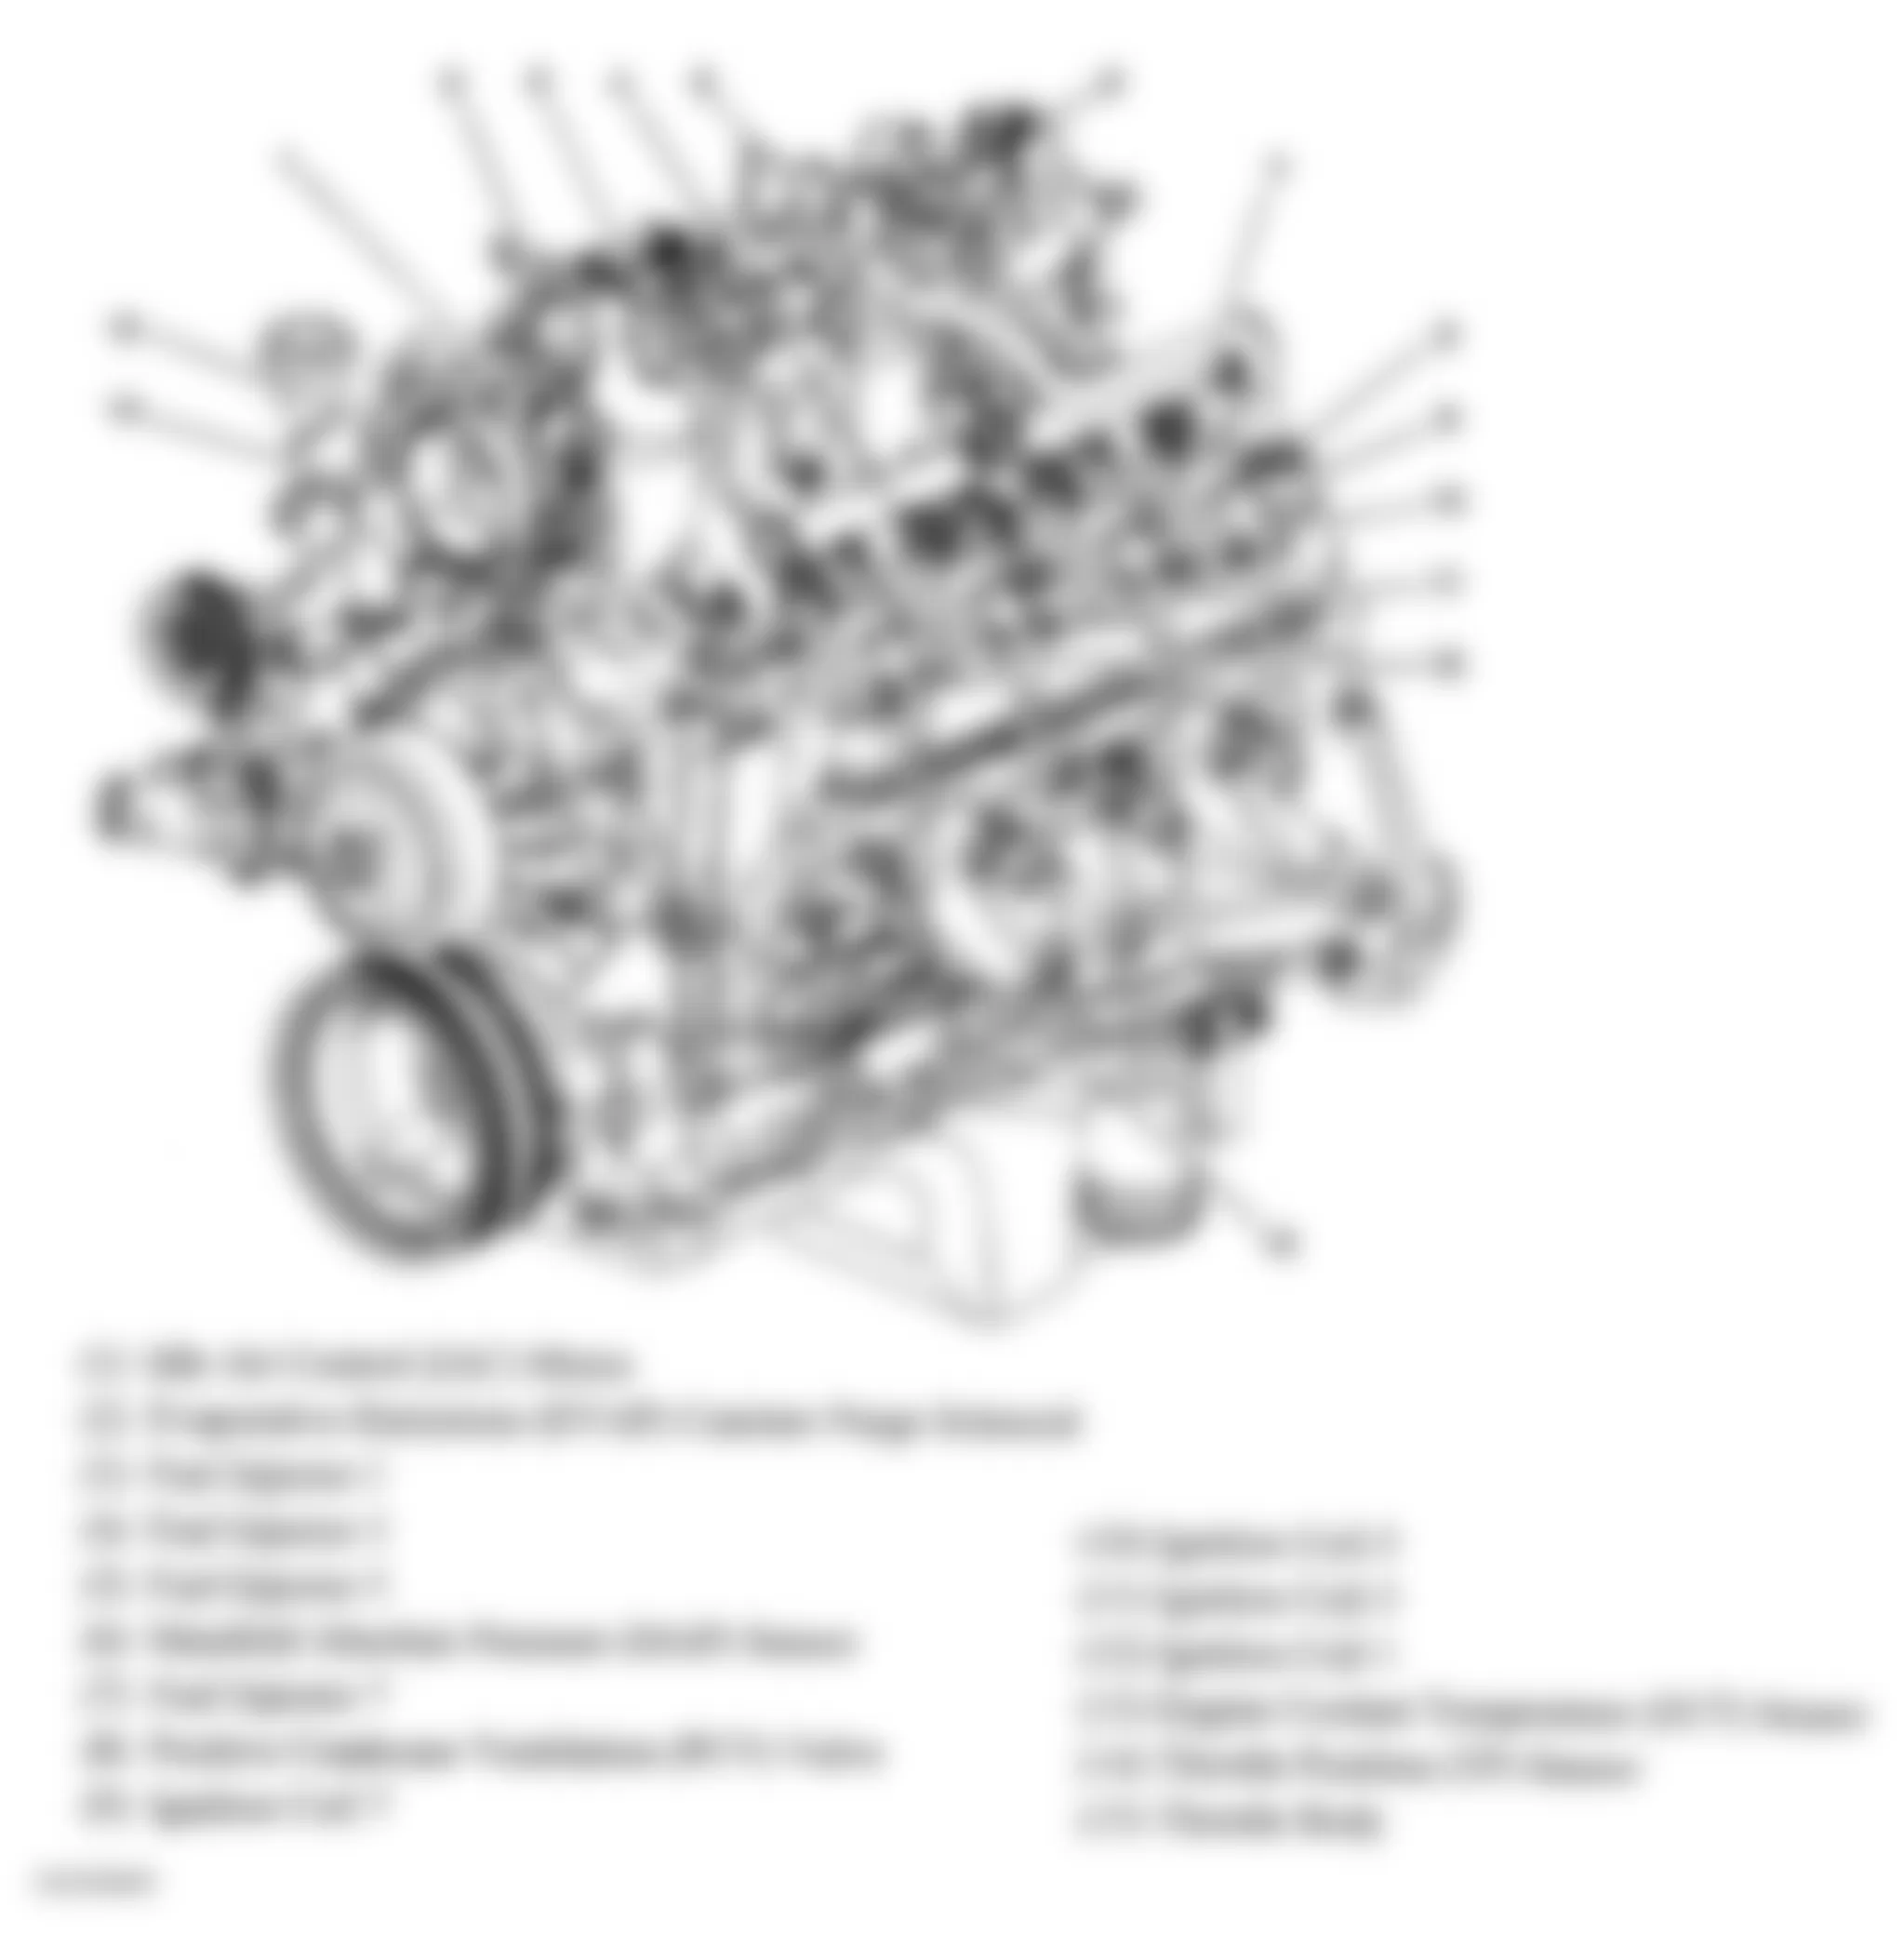 GMC Sierra 3500 2004 - Component Locations -  Left Side Of Engine (4.8L, 5.3L & 6.0L)